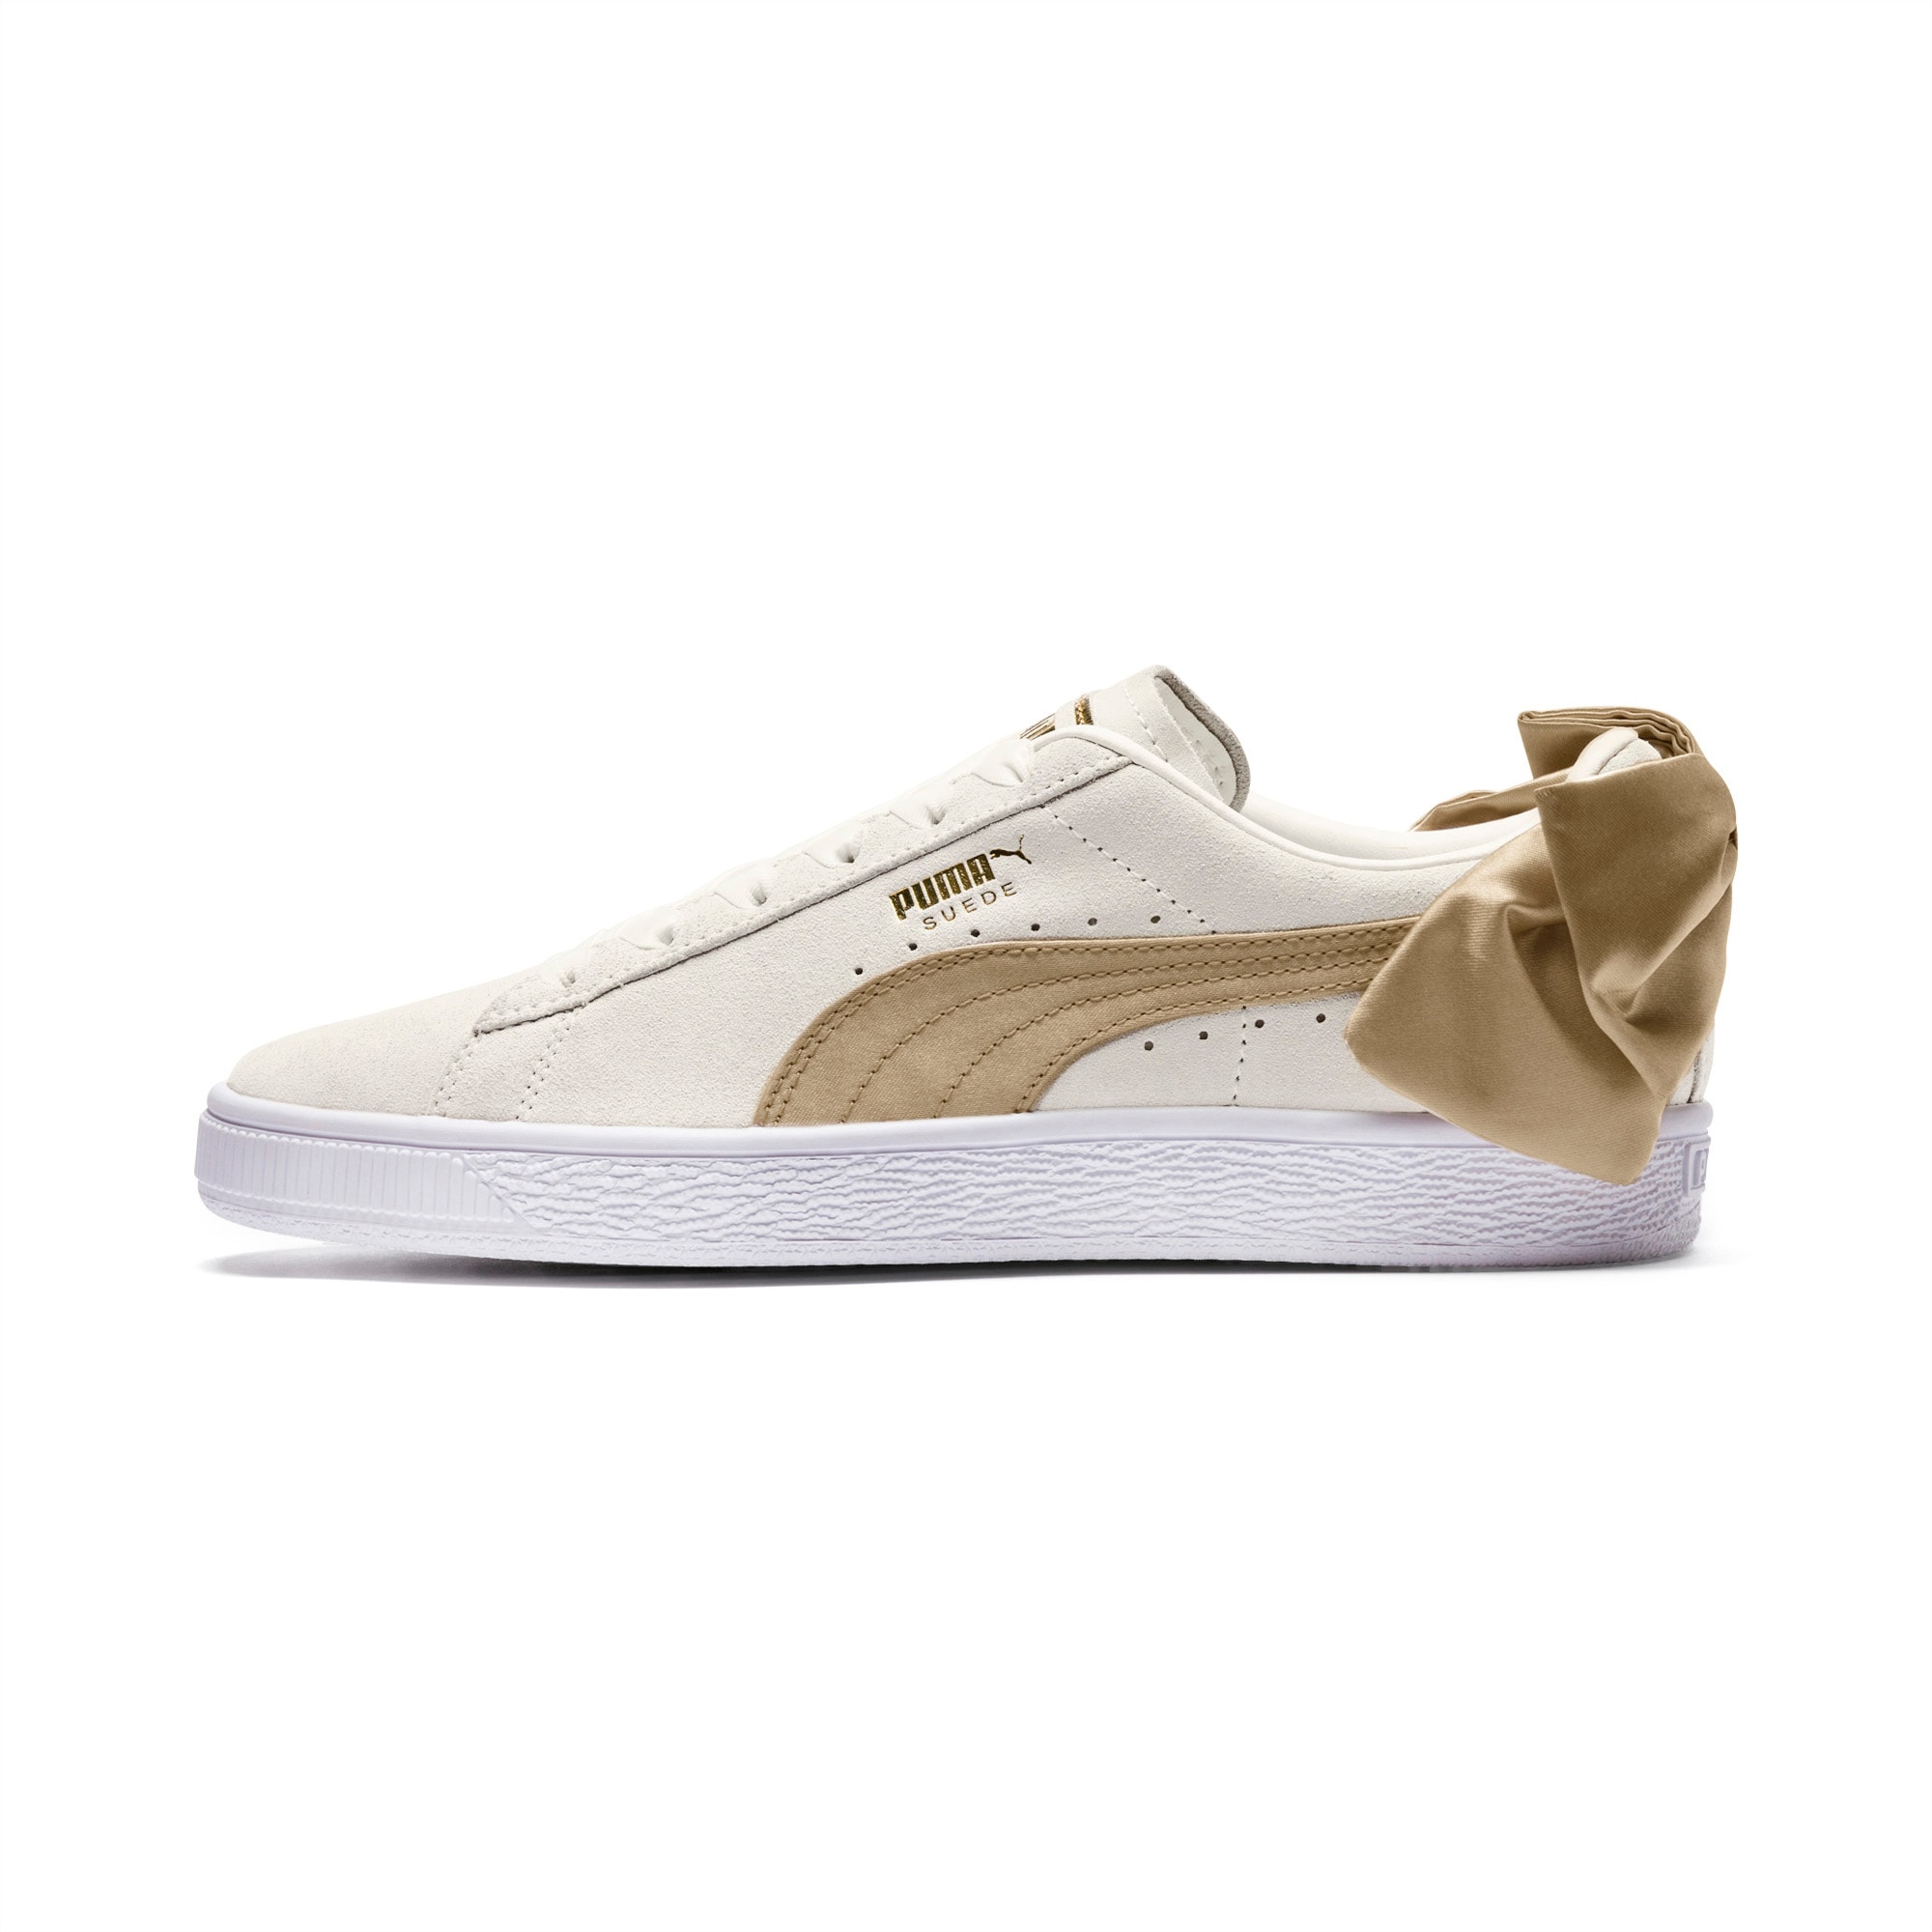 PUMA Chaussure Basket Suede Bow Varsity pour Femme, Blanc/Or, Taille 38, Chaussures